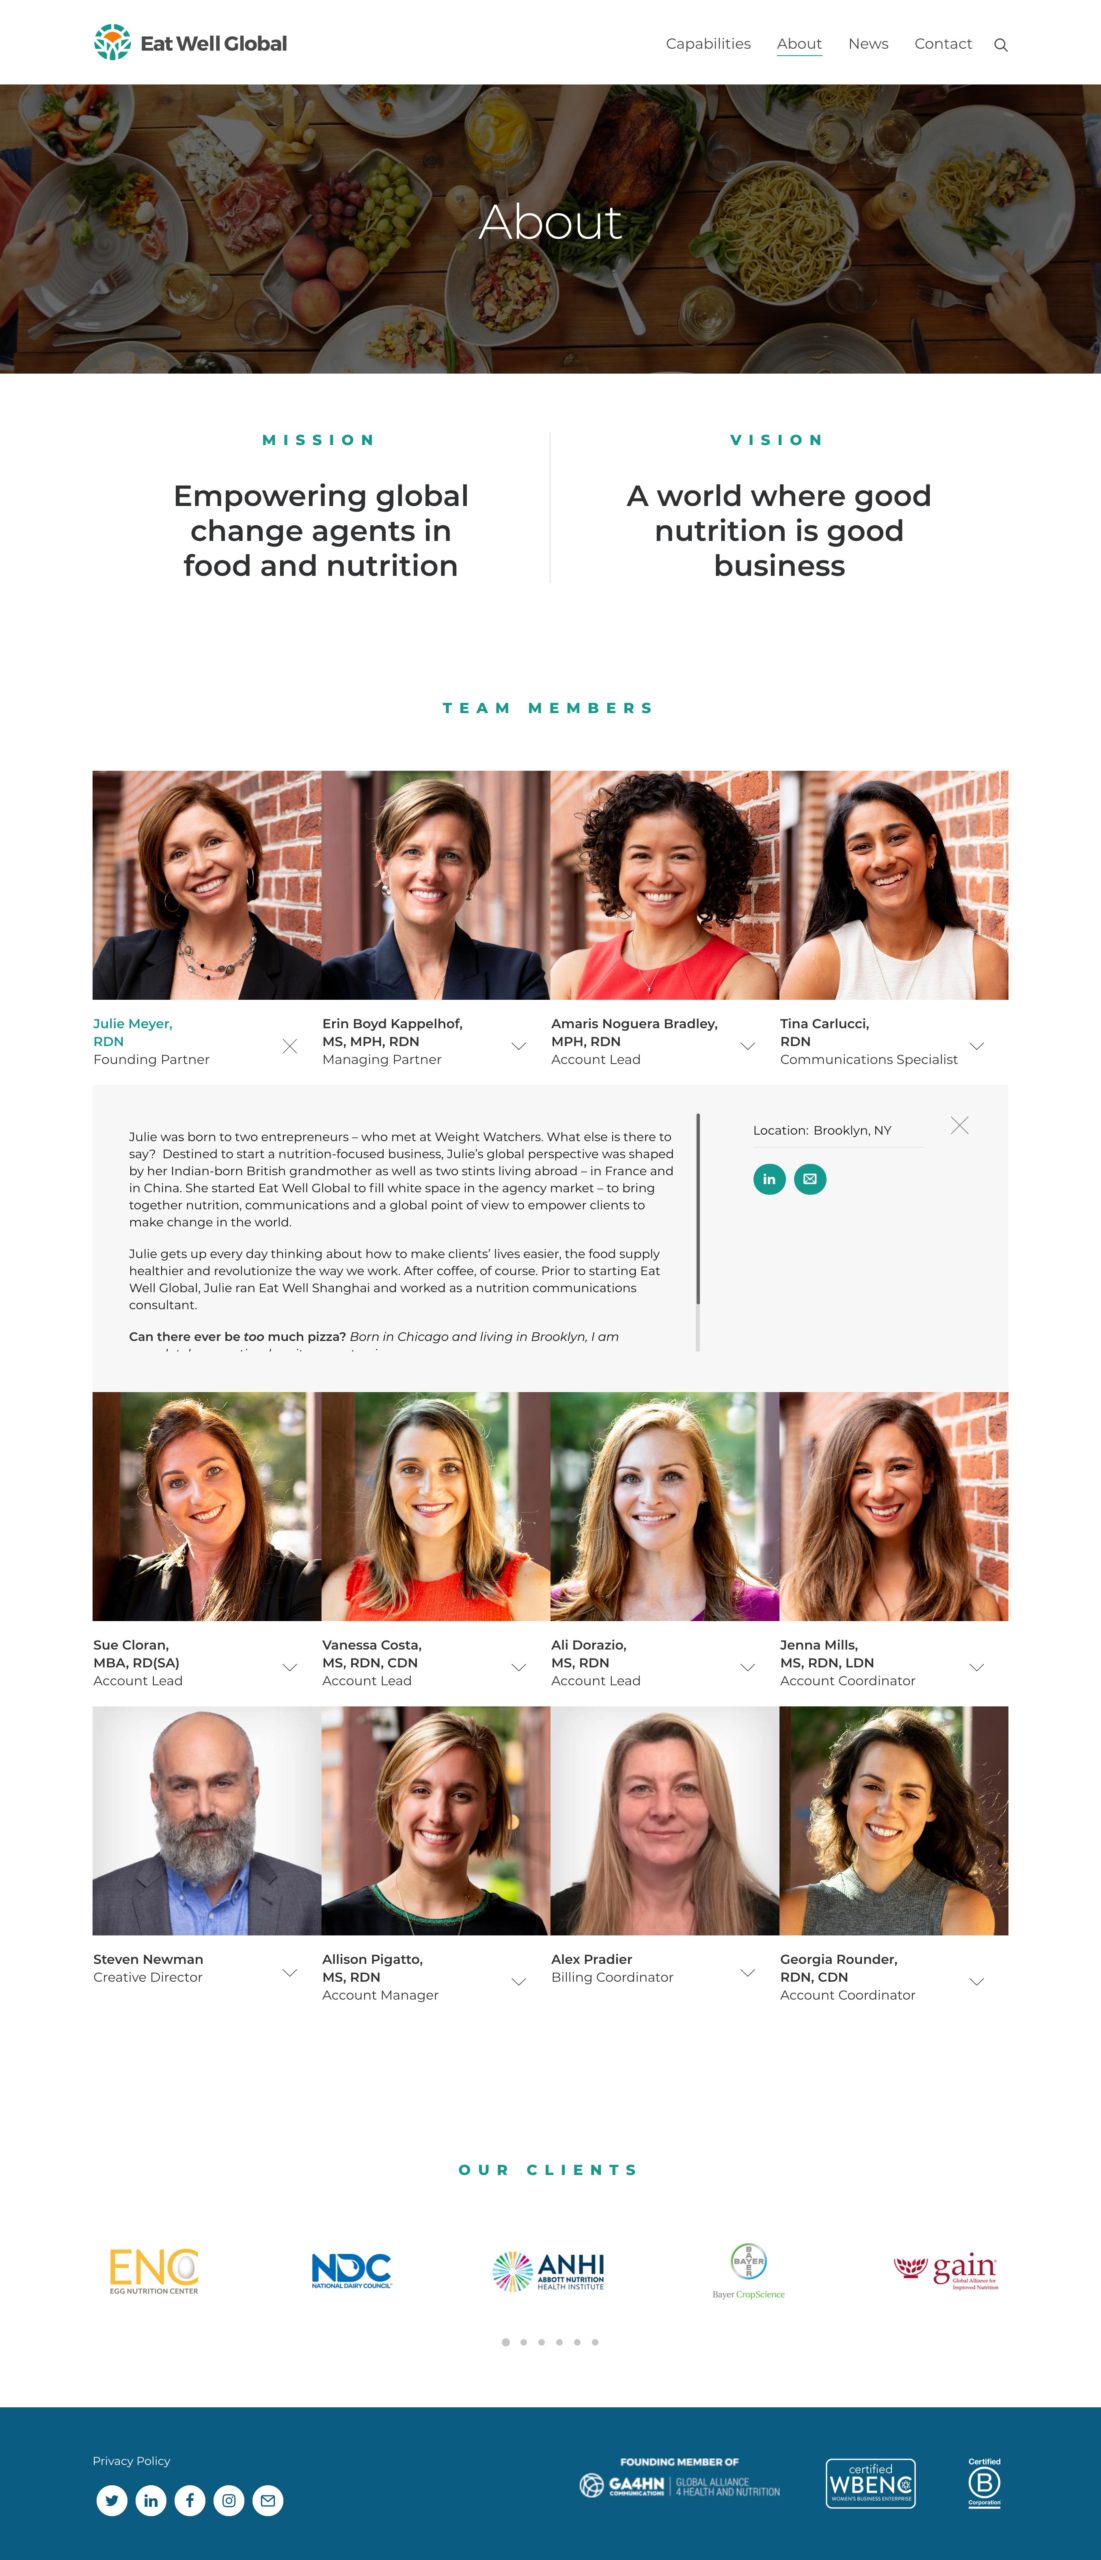 Screenshot of the Eat Well Global about page, showing team members.